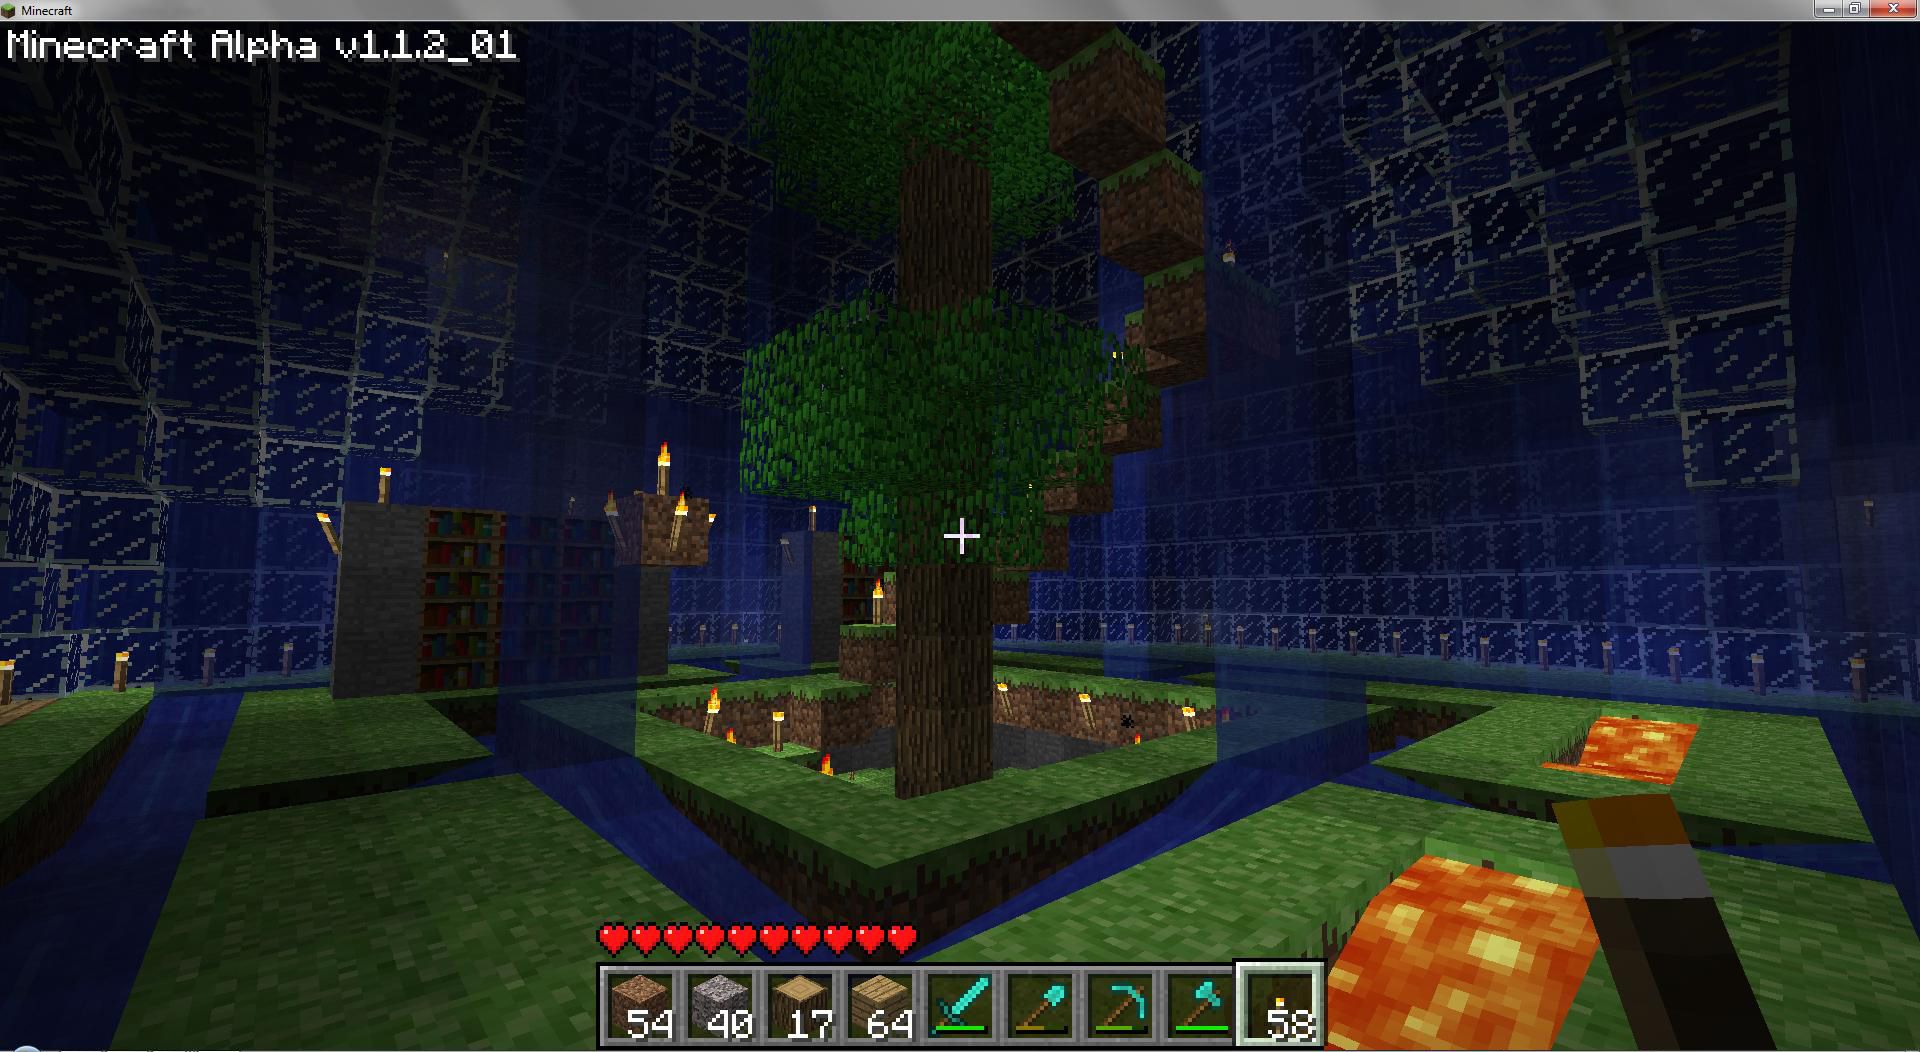 minecraft live wallpapers,action adventure game,pc game,video game software,screenshot,games